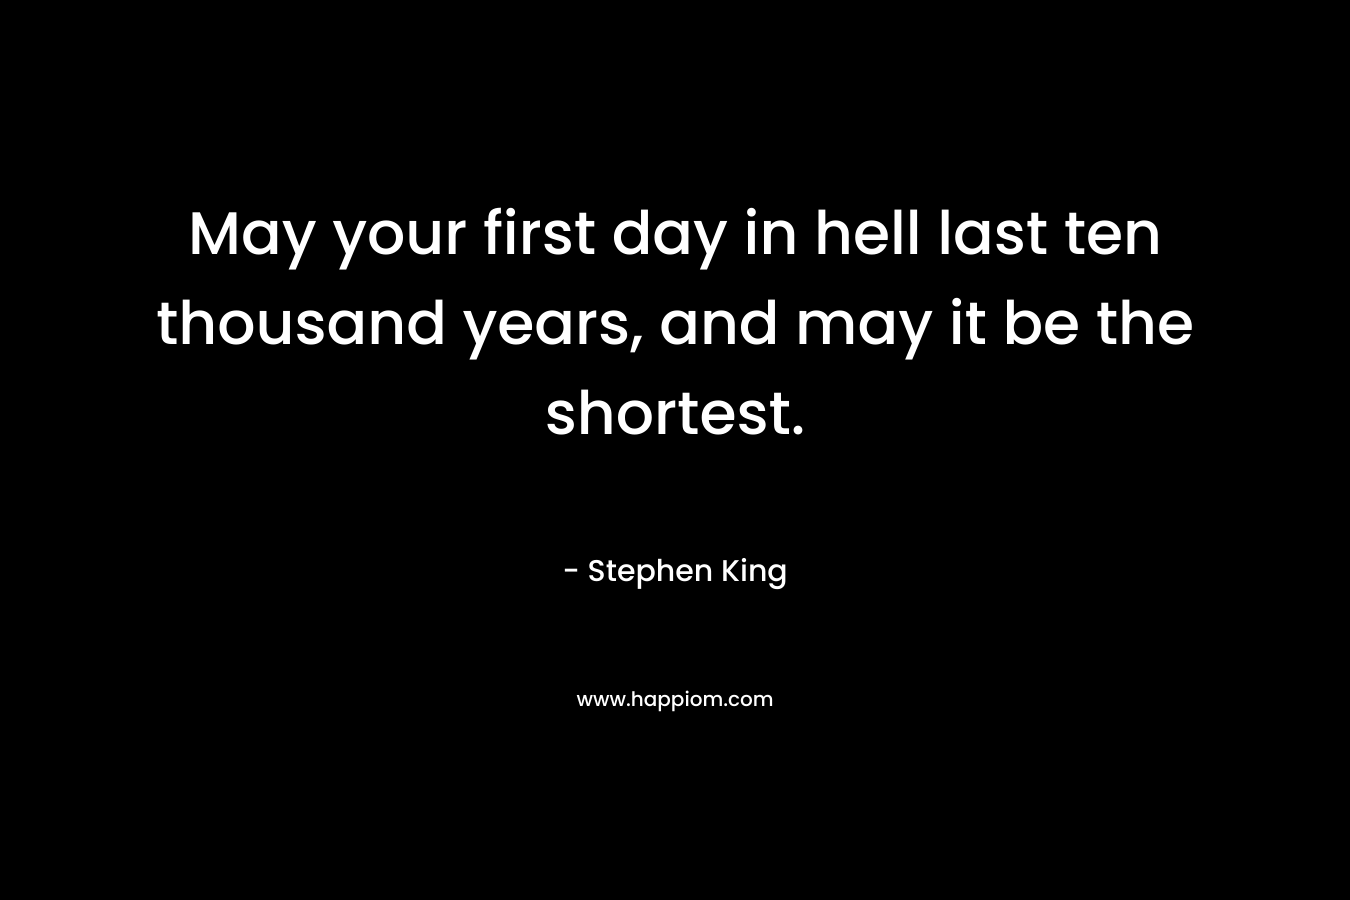 May your first day in hell last ten thousand years, and may it be the shortest. – Stephen King